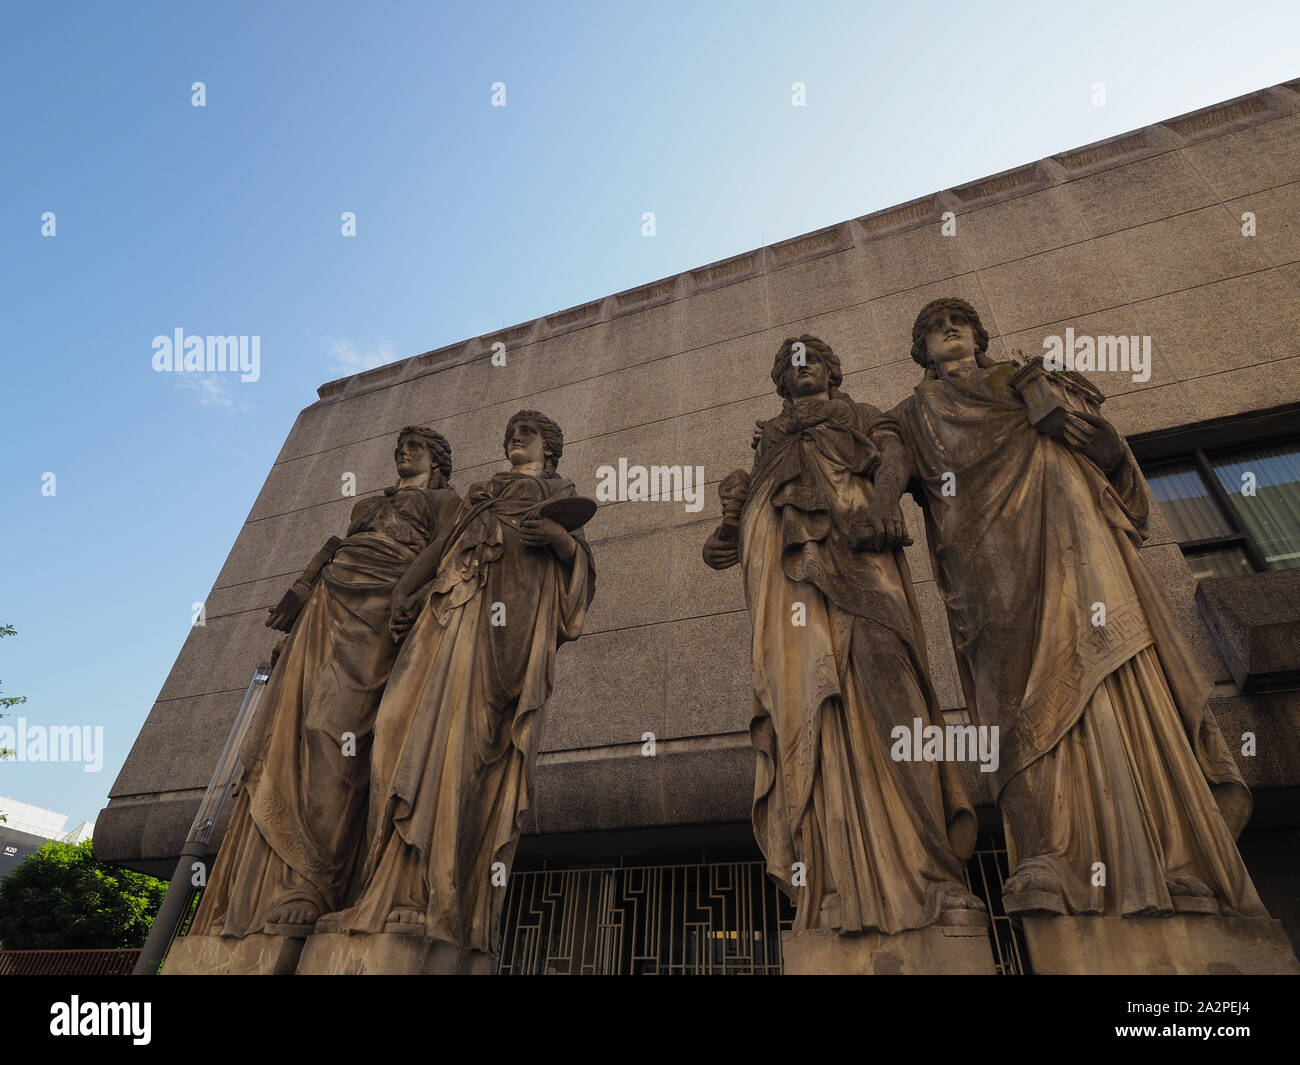 Karyatiden (meaning Caryatids) in front of the Kunsthalle (Art Gallery) by Leo Muesch unveiled in1879 in Duesseldorf, Germany Stock Photo